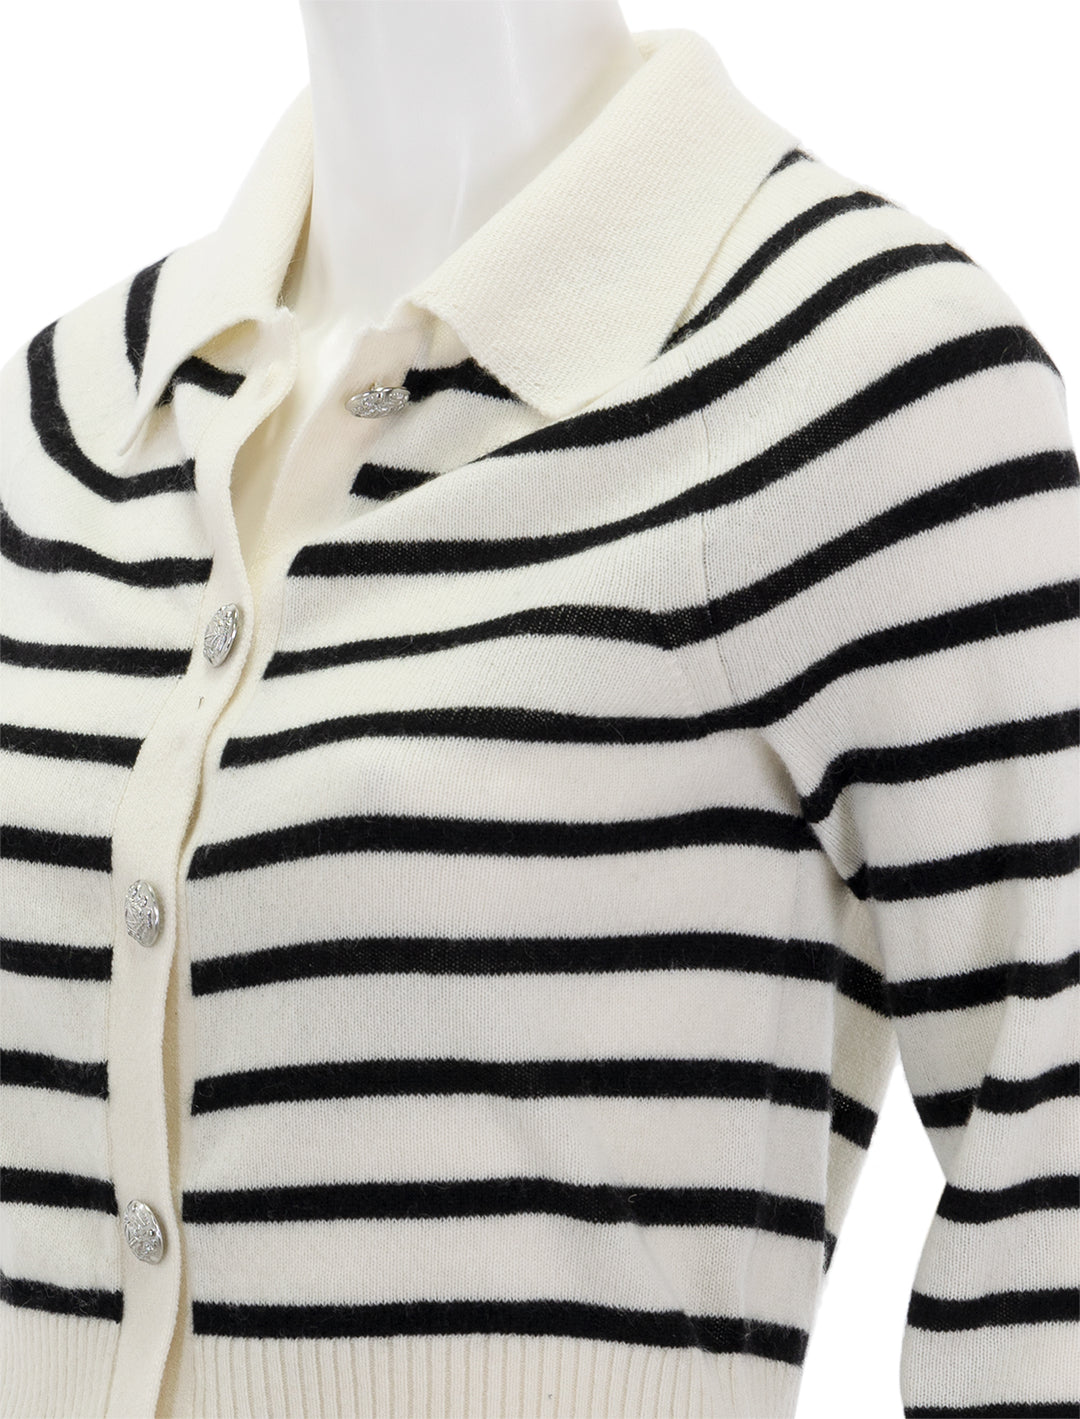 Close-up view of Veronica Beard's cheshire cardigan in off-white and black stripe.